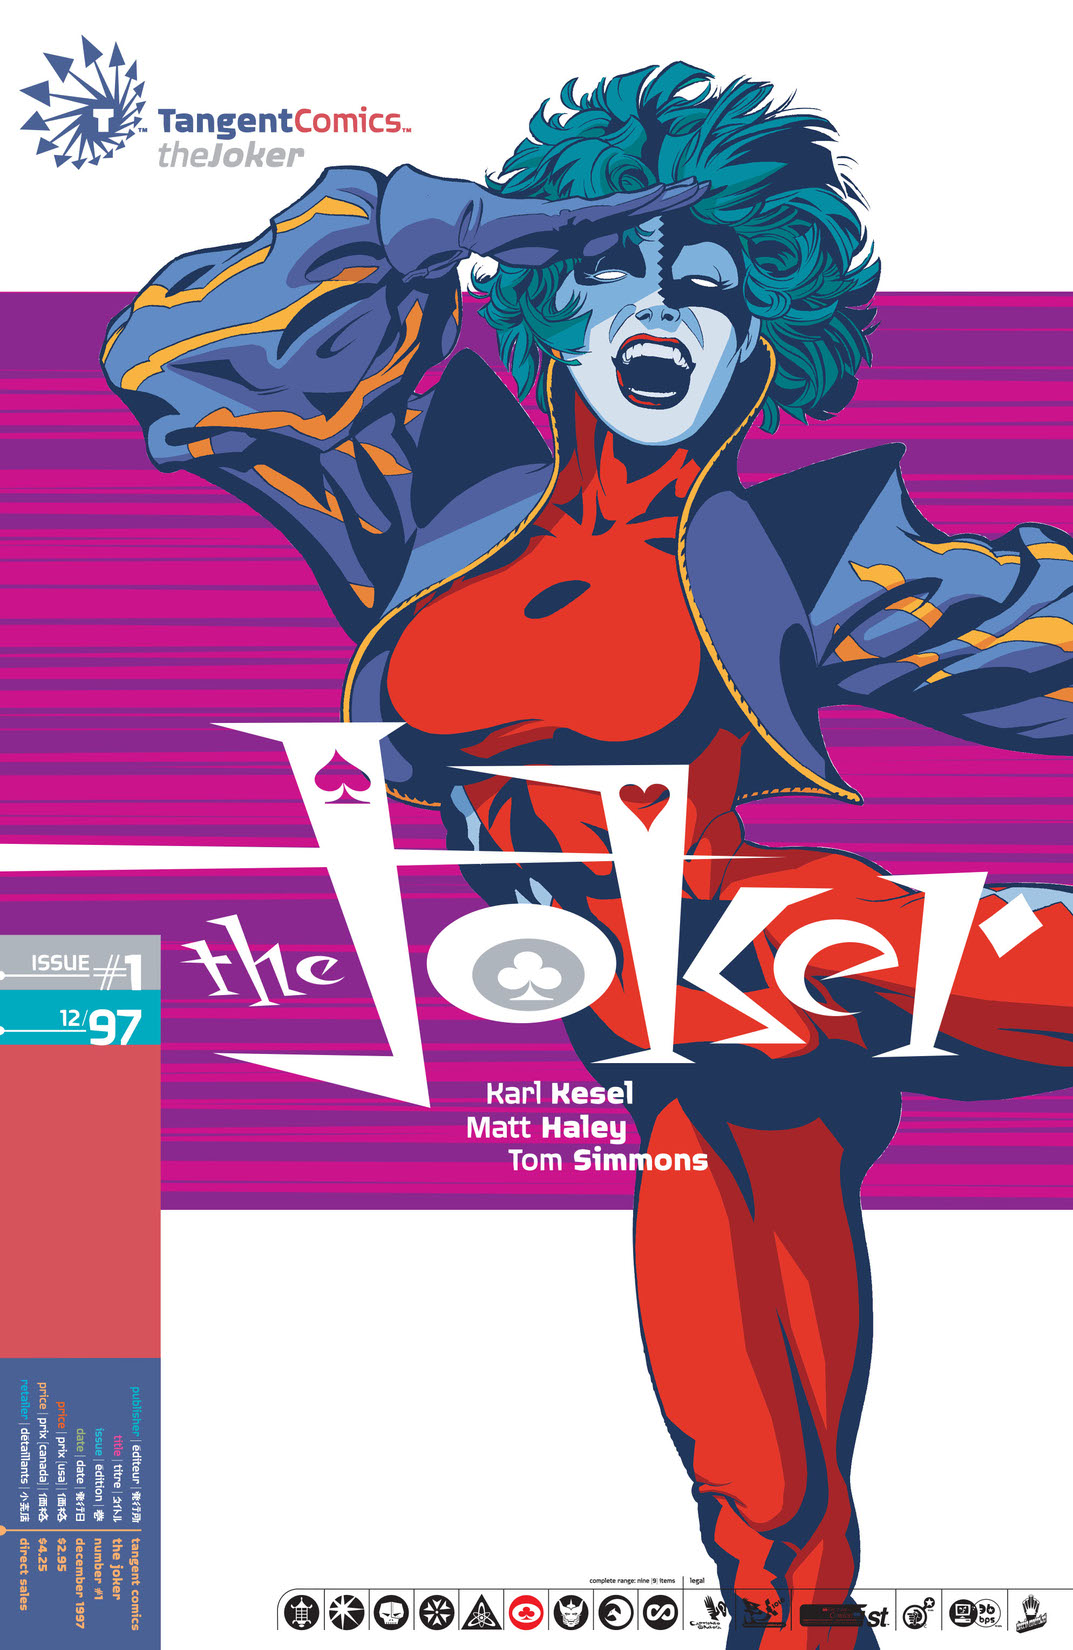 The Joker #1 preview images